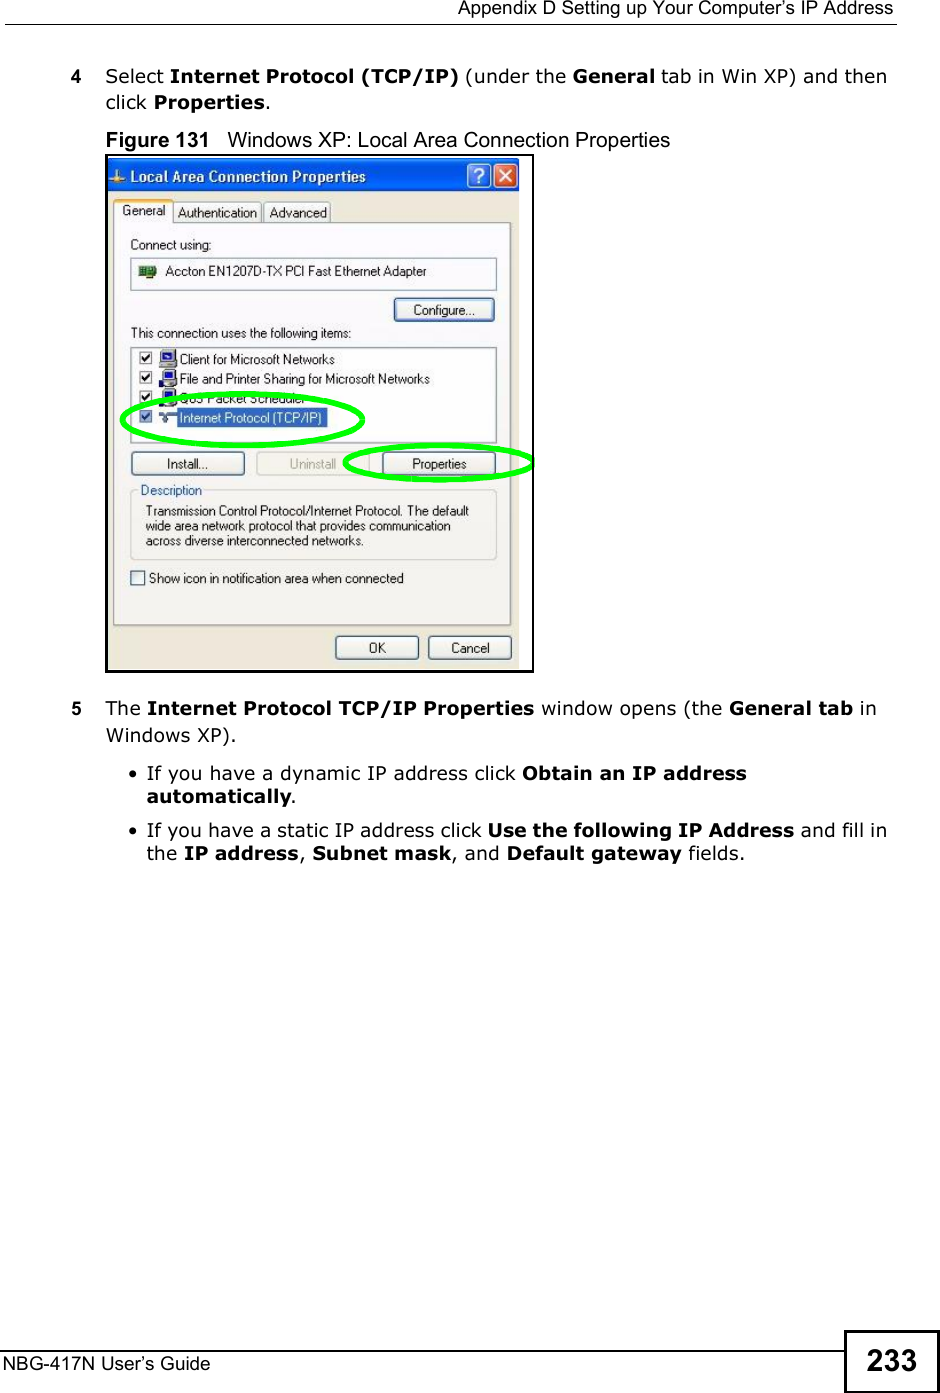  Appendix DSetting up Your Computer s IP AddressNBG-417N User s Guide 2334Select Internet Protocol (TCP/IP) (under the General tab in Win XP) and then click Properties.Figure 131   Windows XP: Local Area Connection Properties5The Internet Protocol TCP/IP Properties window opens (the General tab in Windows XP). If you have a dynamic IP address click Obtain an IP address automatically. If you have a static IP address click Use the following IP Address and fill in the IP address, Subnet mask, and Default gateway fields. 